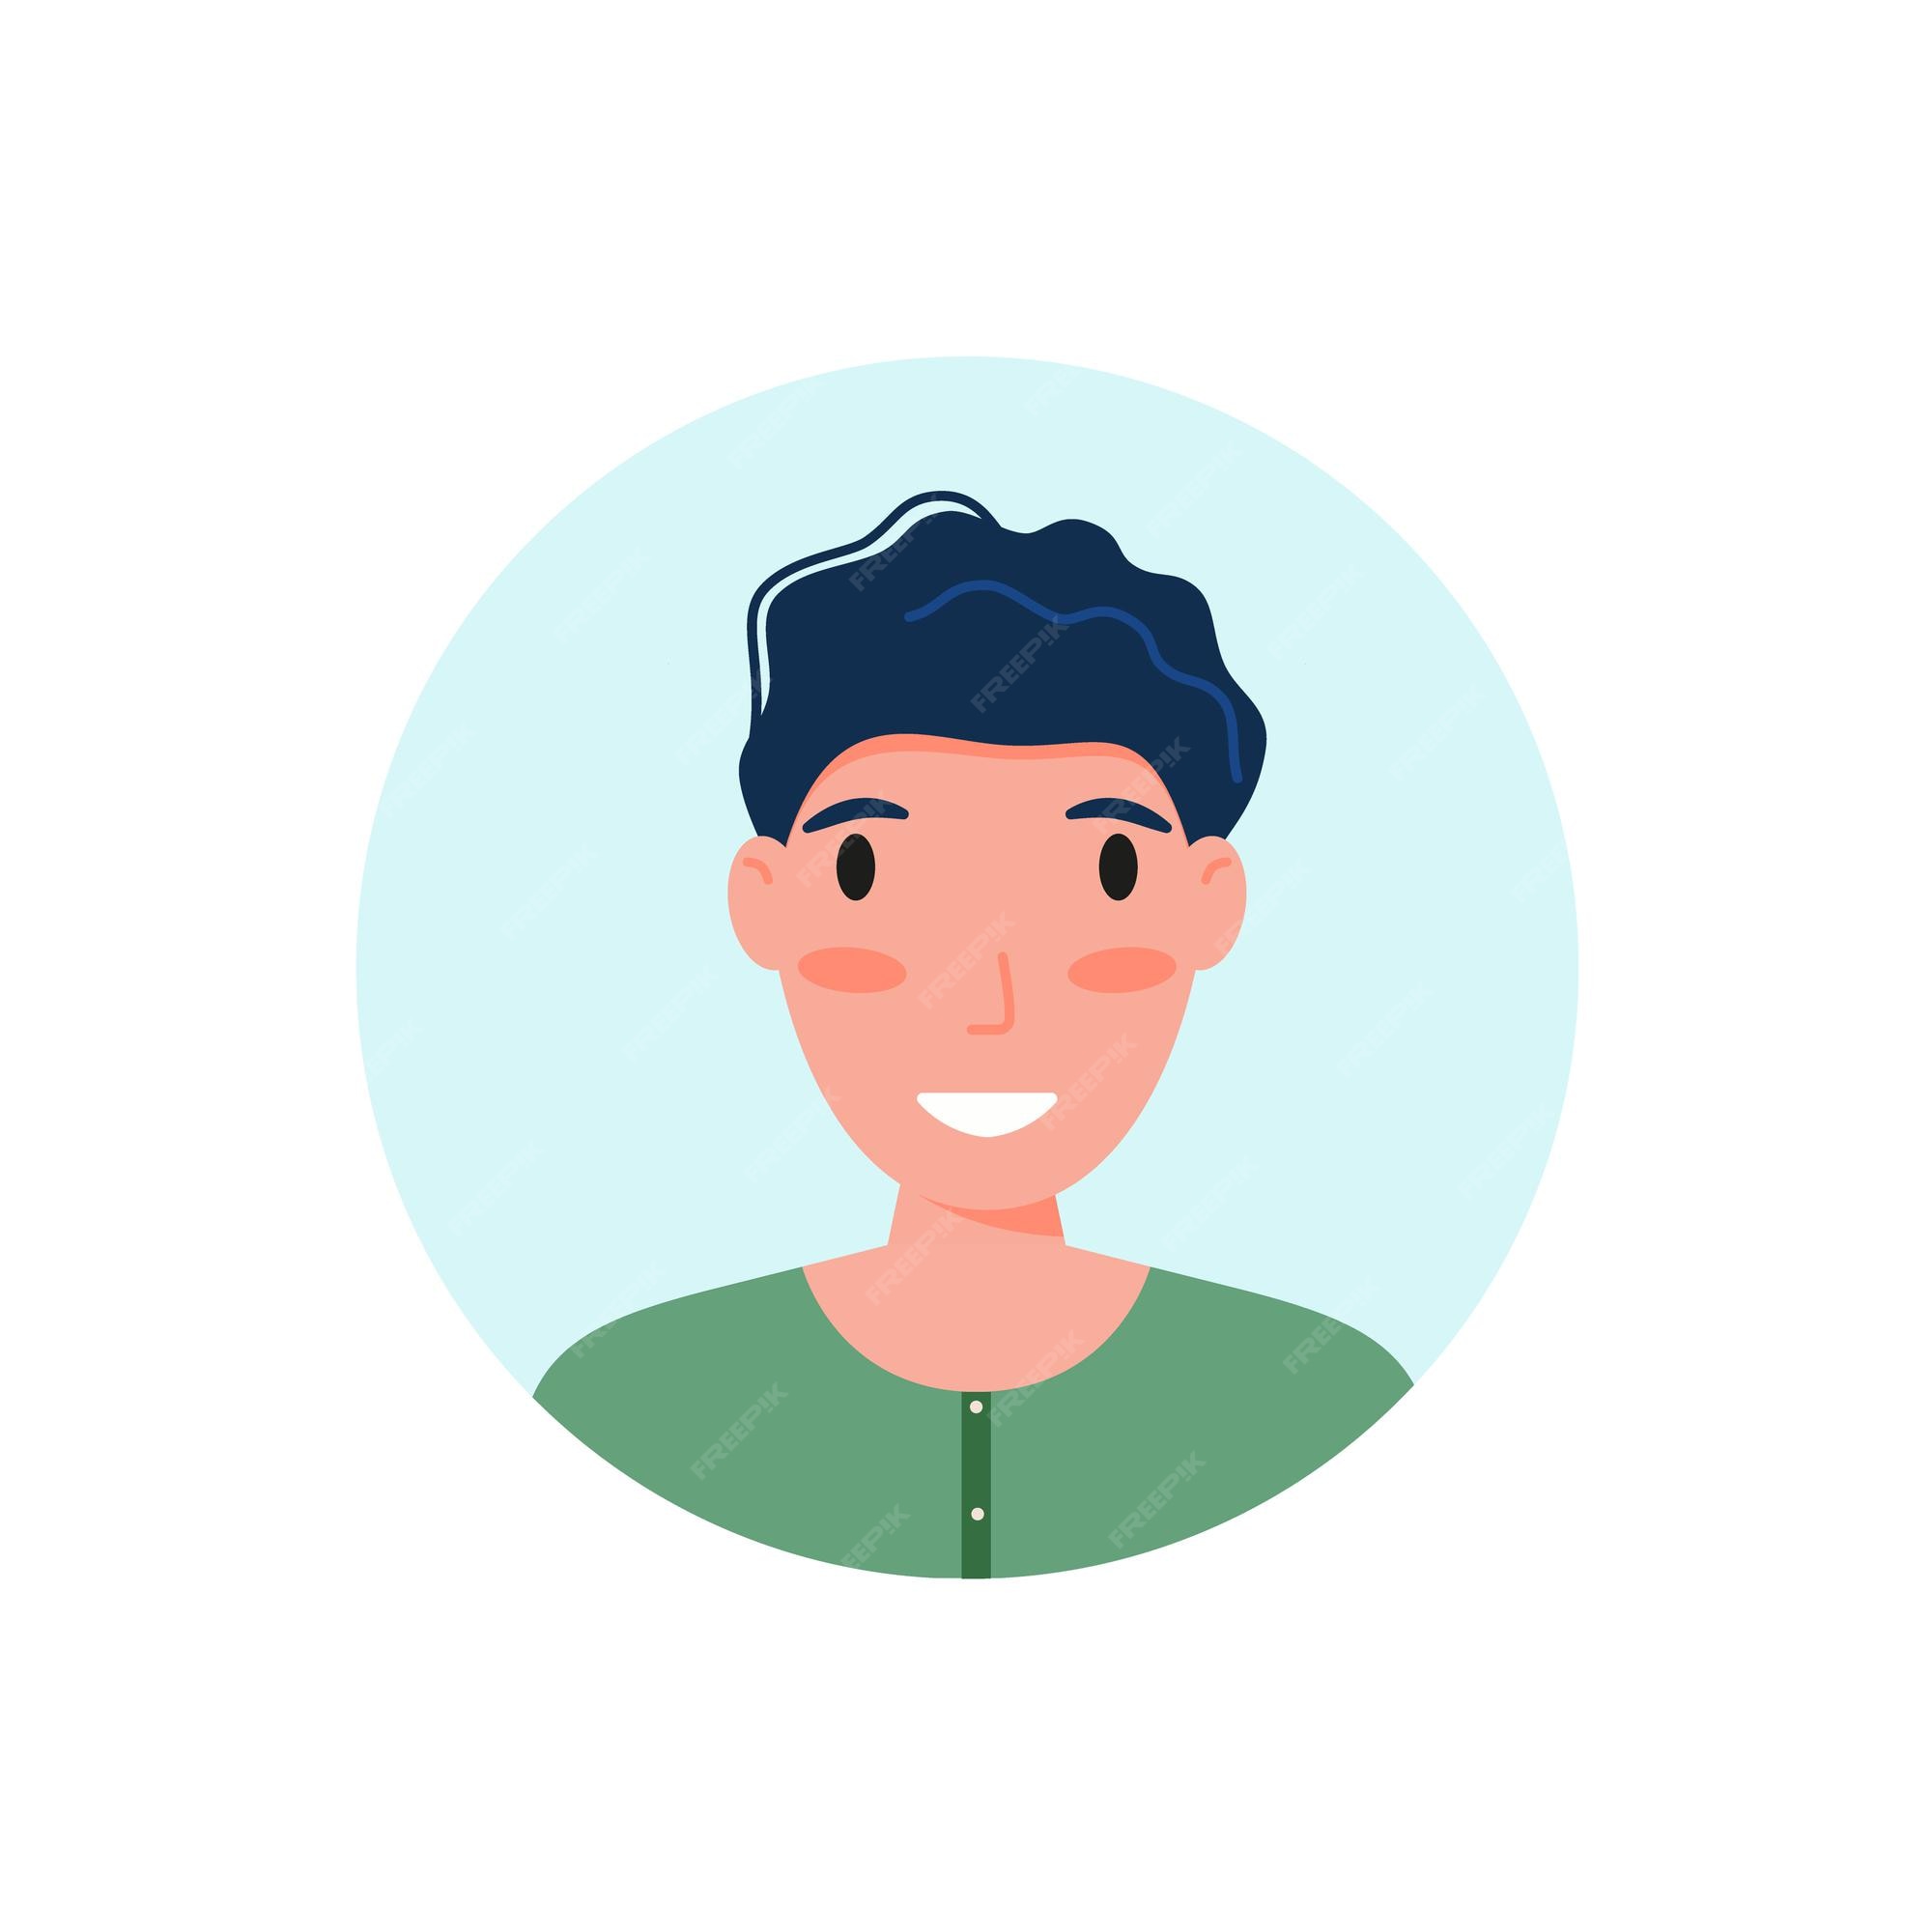 Man Avatar Icon. Flat Illustration Of Man Avatar Vector Icon Isolated On  White Background Royalty Free SVG, Cliparts, Vectors, and Stock  Illustration. Image 91832679.